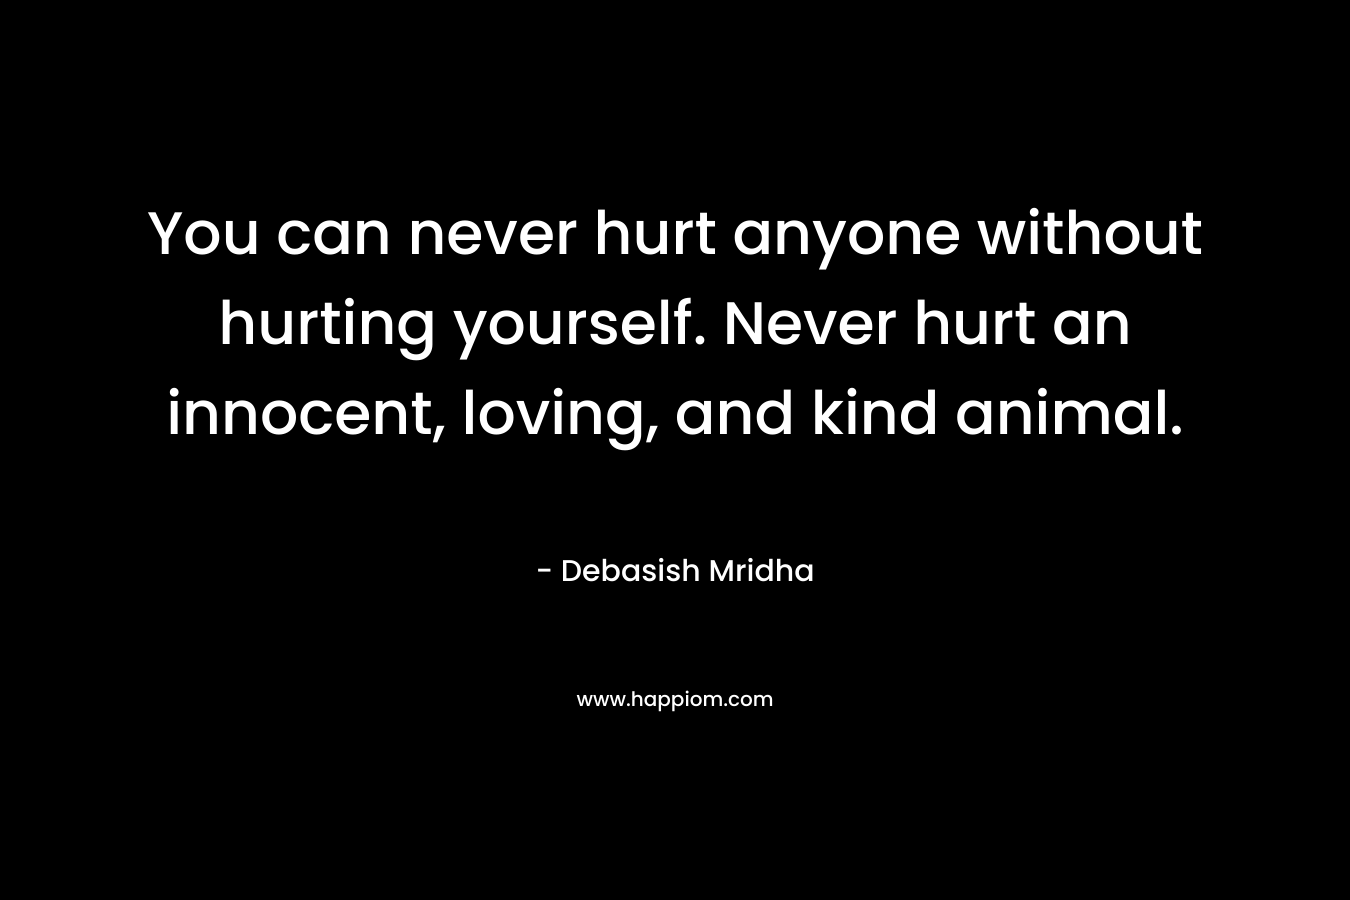 You can never hurt anyone without hurting yourself. Never hurt an innocent, loving, and kind animal.